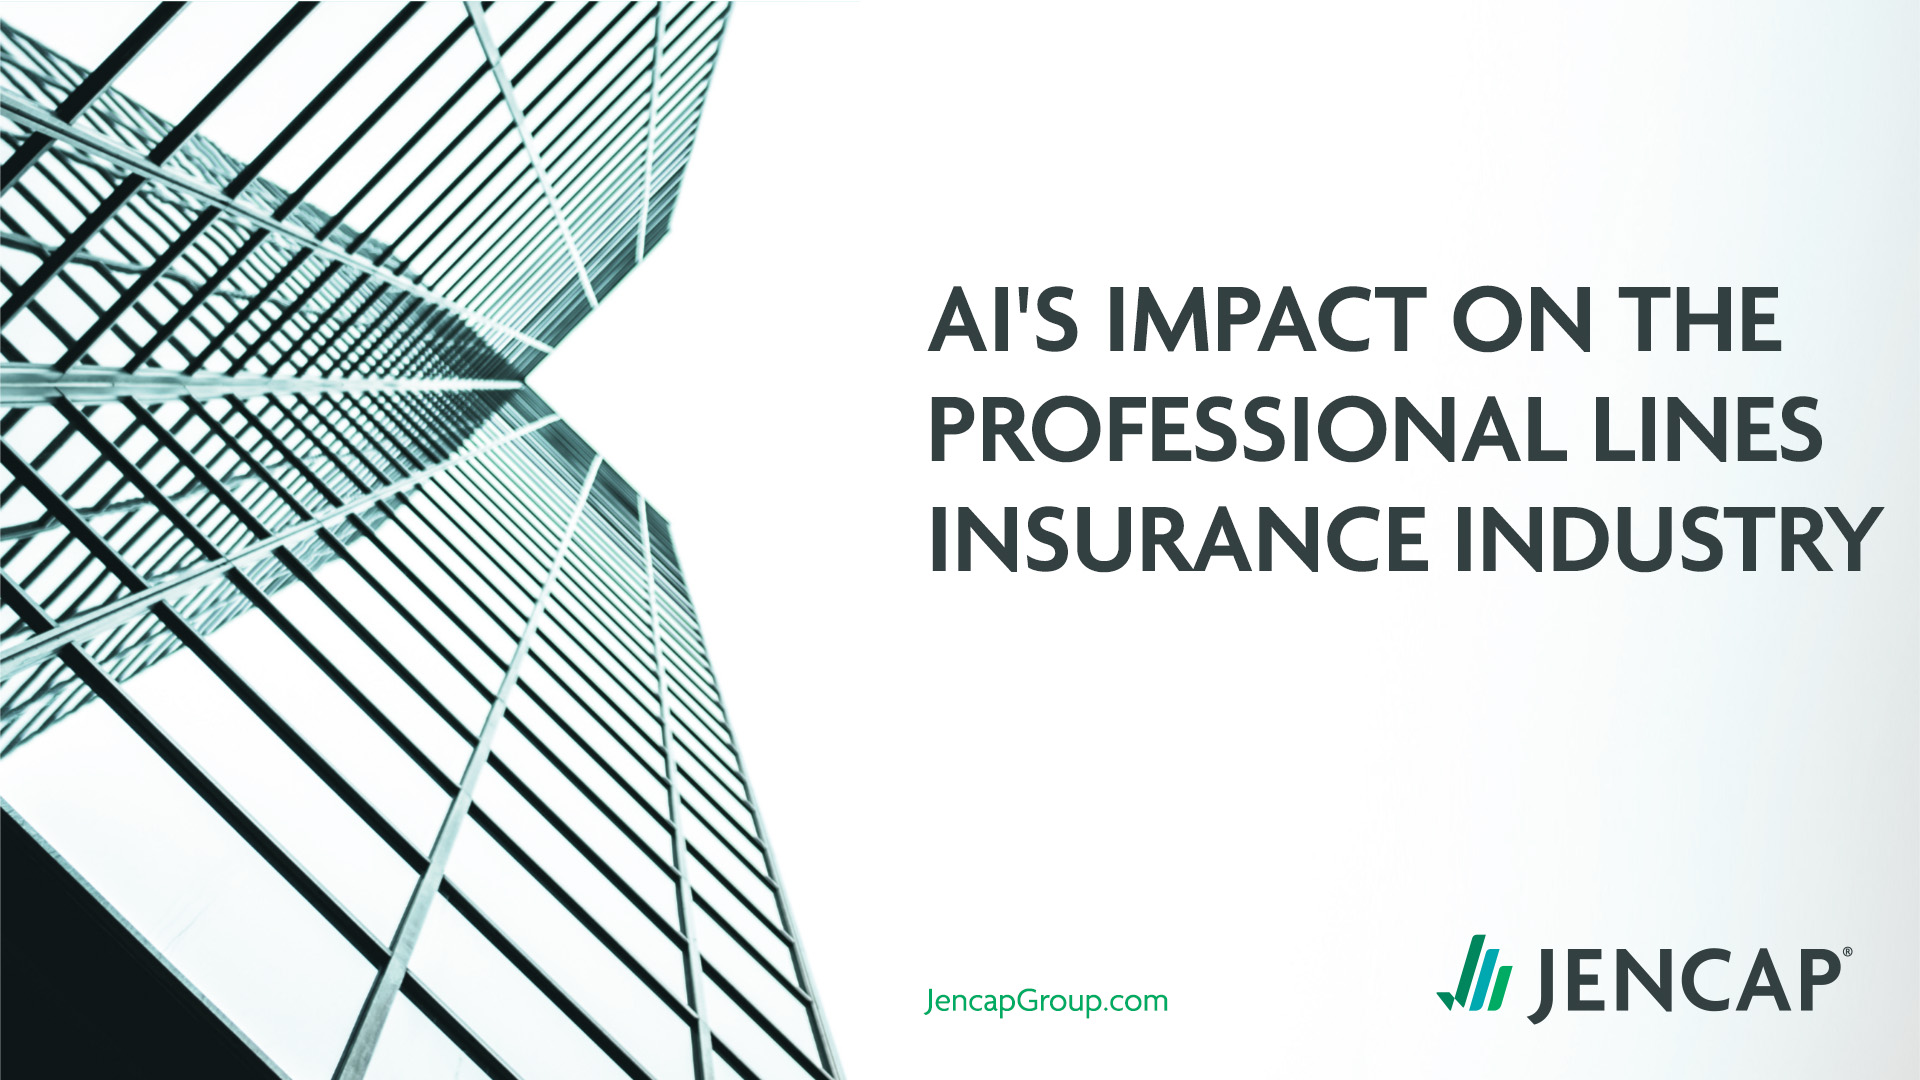 AI's Impact on the Professional Lines Insurance Industry